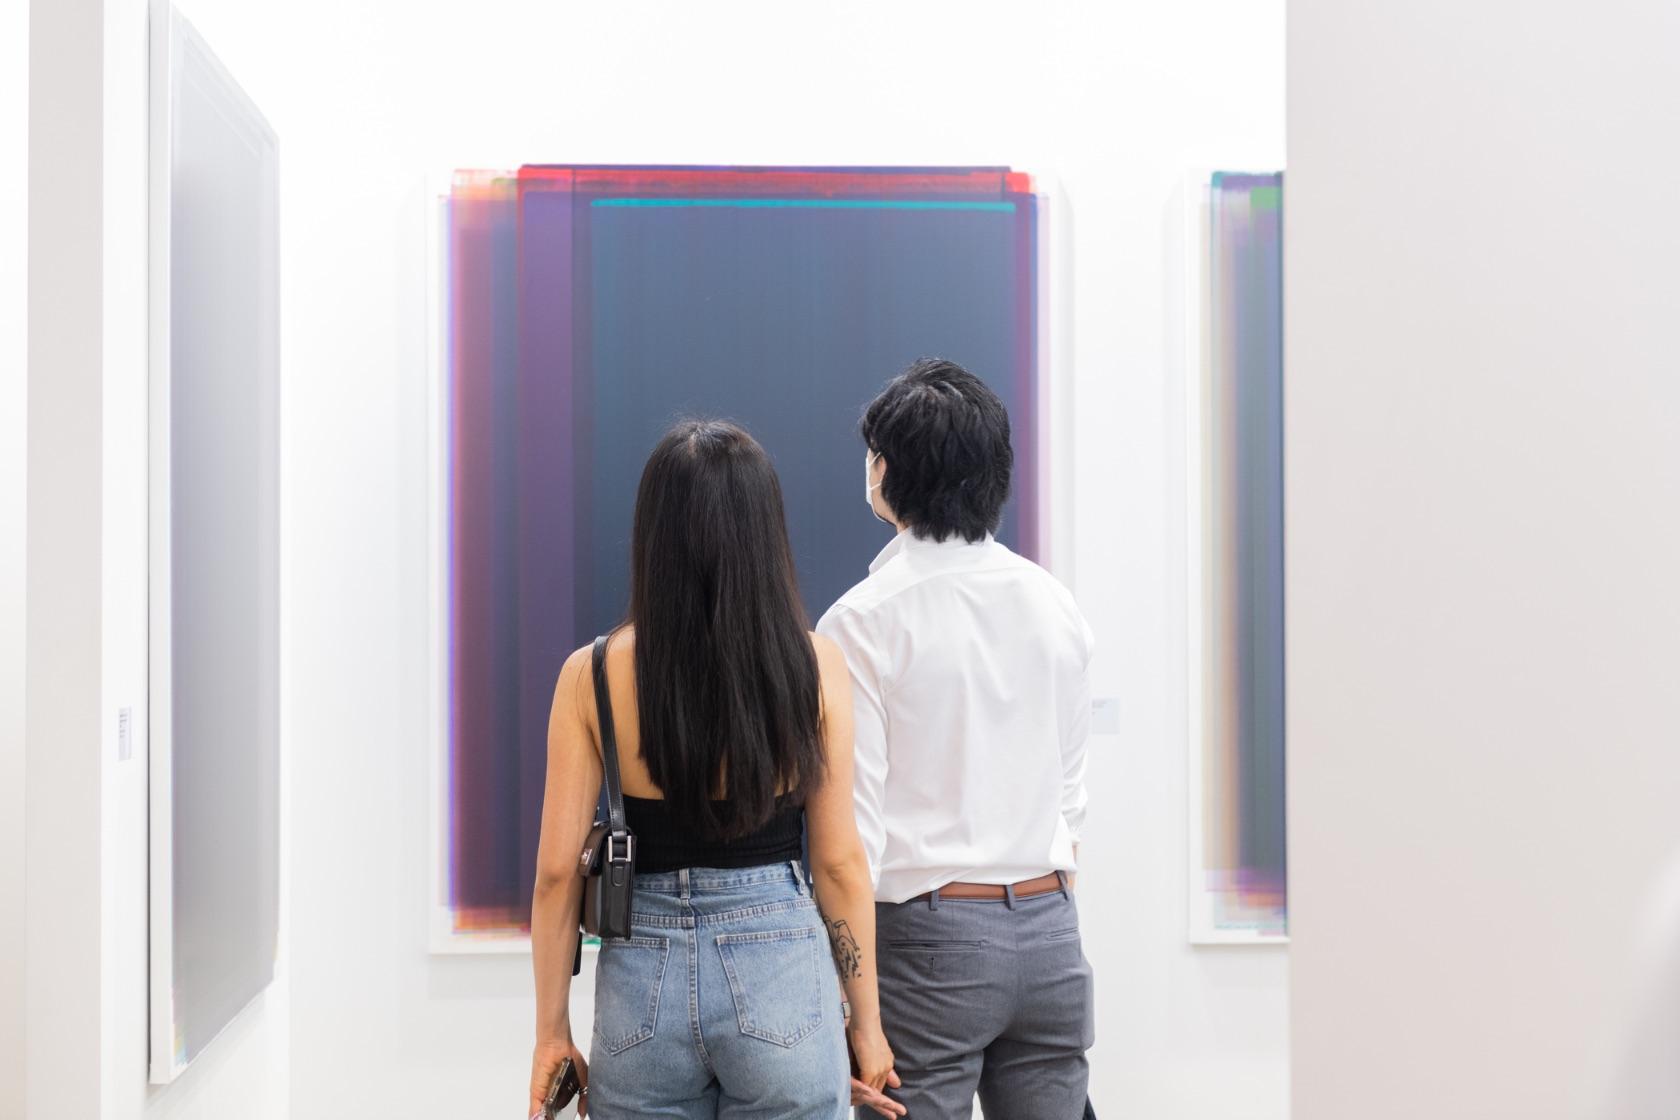 Art Central returns to Hong Kong this March 2023